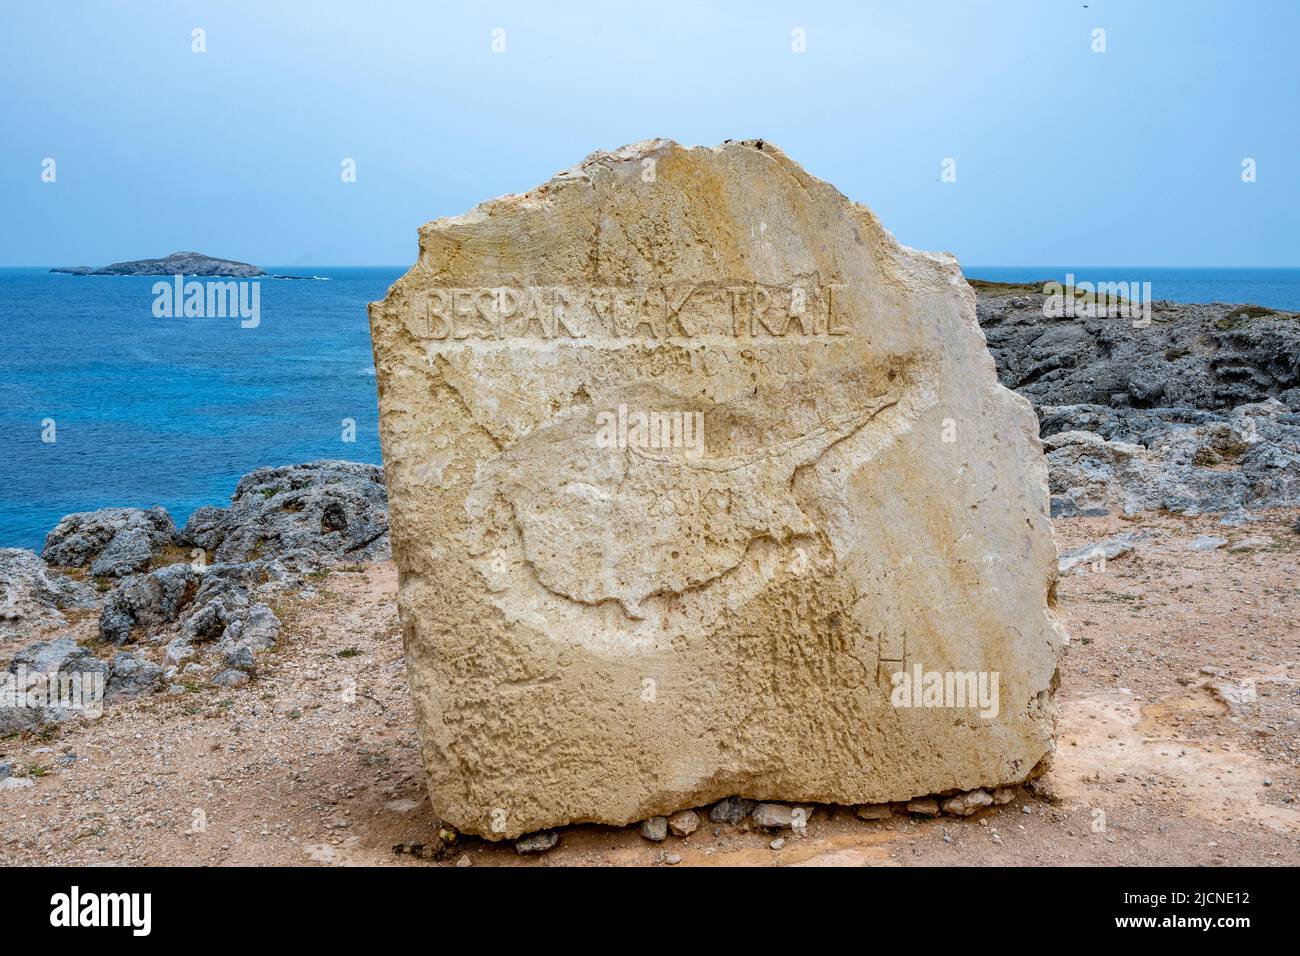 The outline of Cyprus Island carved on a slab of limestone marks the eastern most point of the island, Cape Apostolos Andreas. Cyprus. Stock Photo